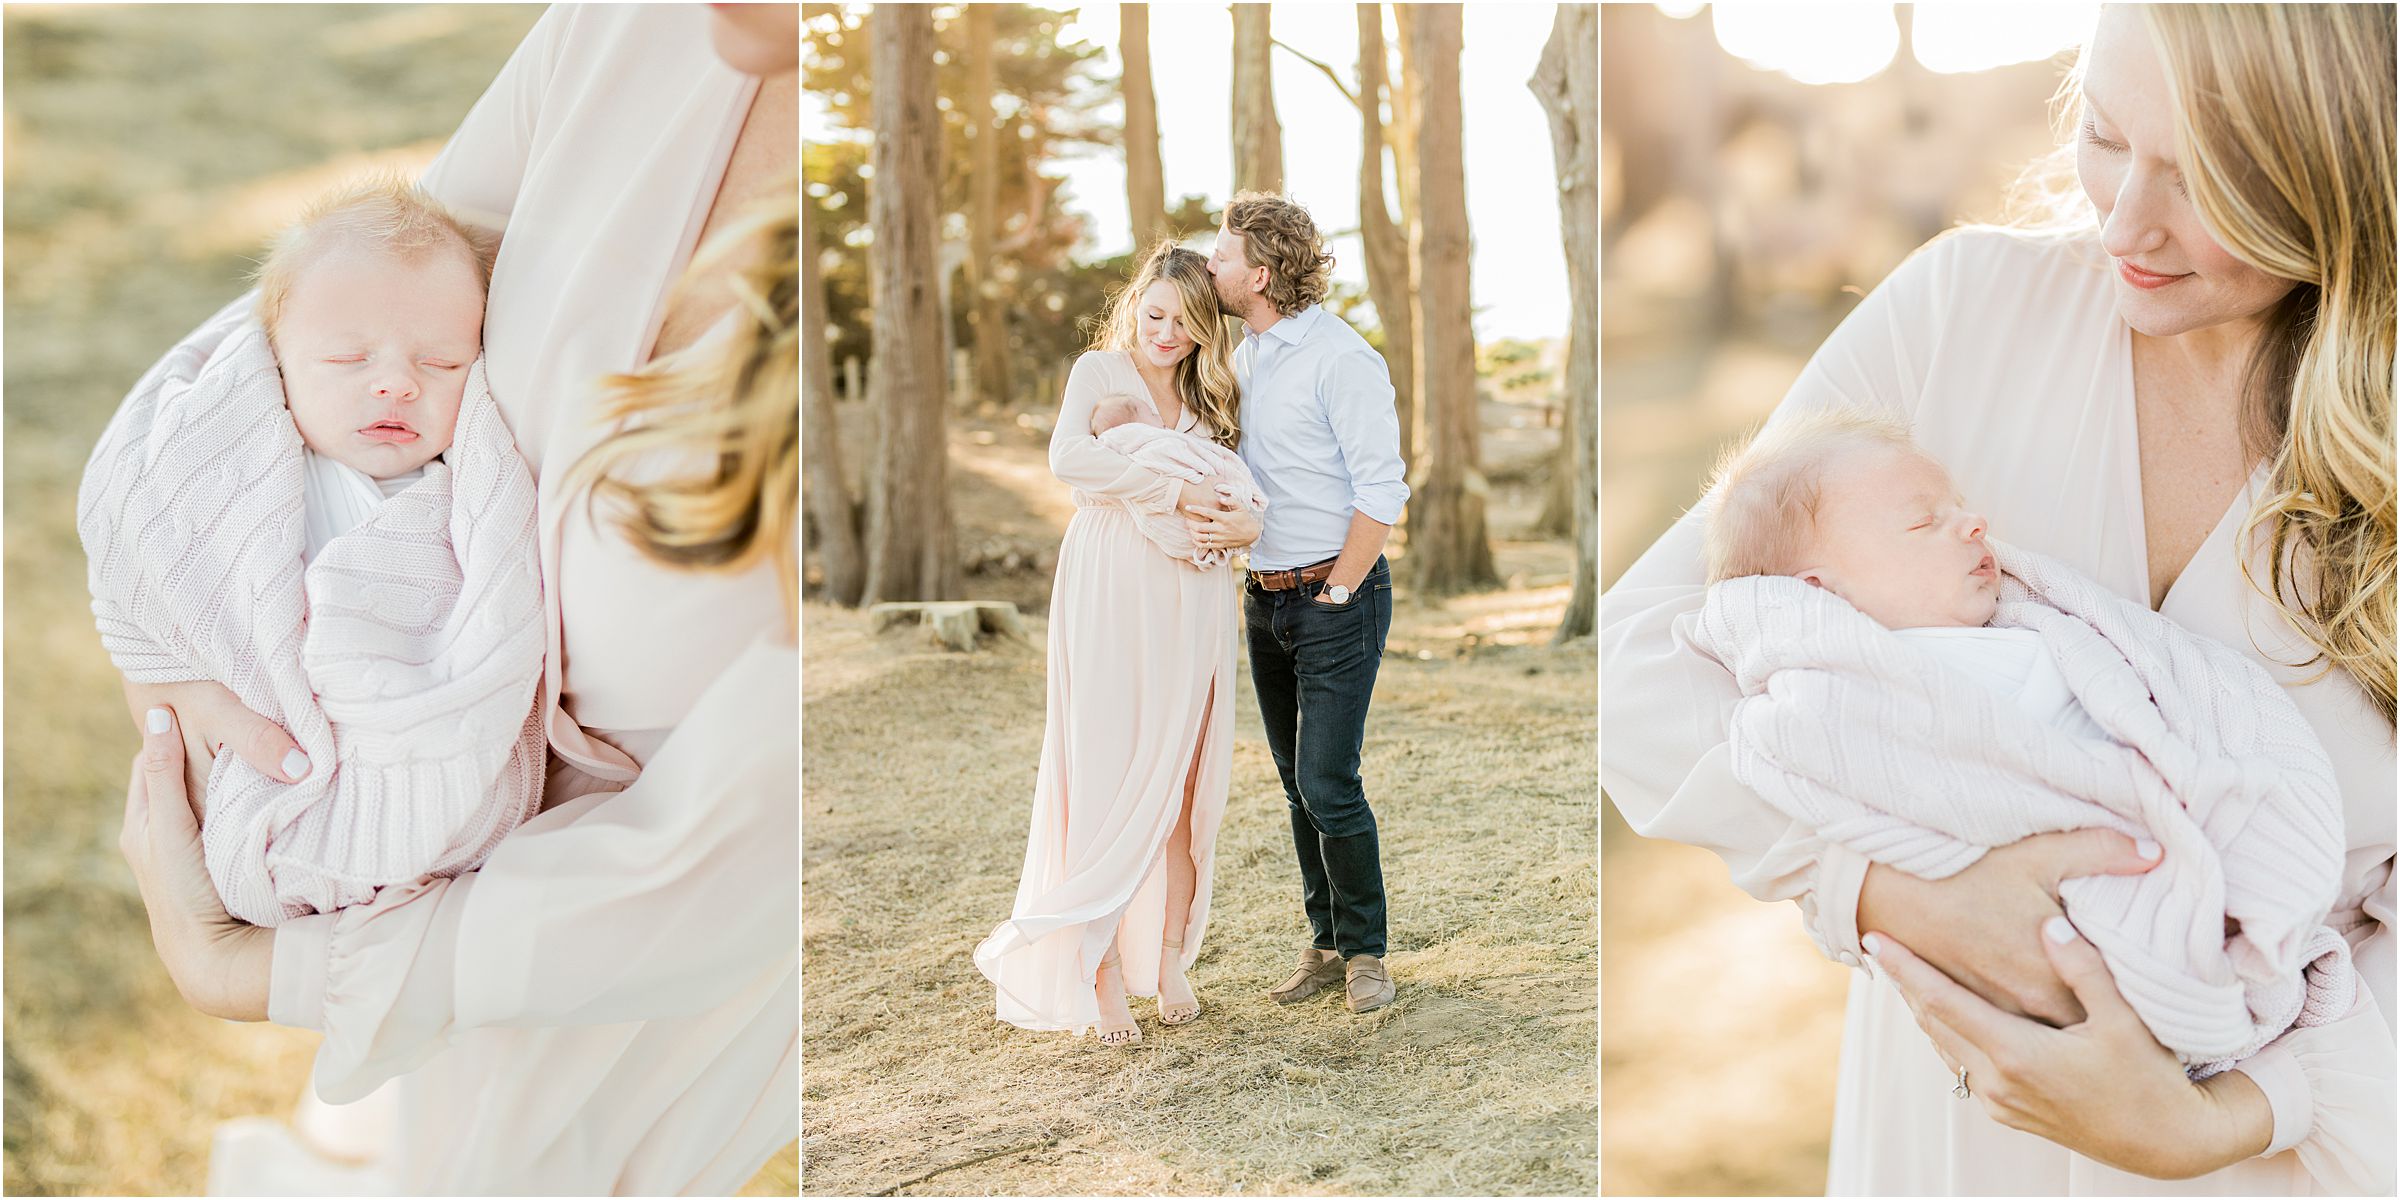 Outdoor Newborn Photography in San Francisco at Lands end Light and airy Bay Area newborn photography